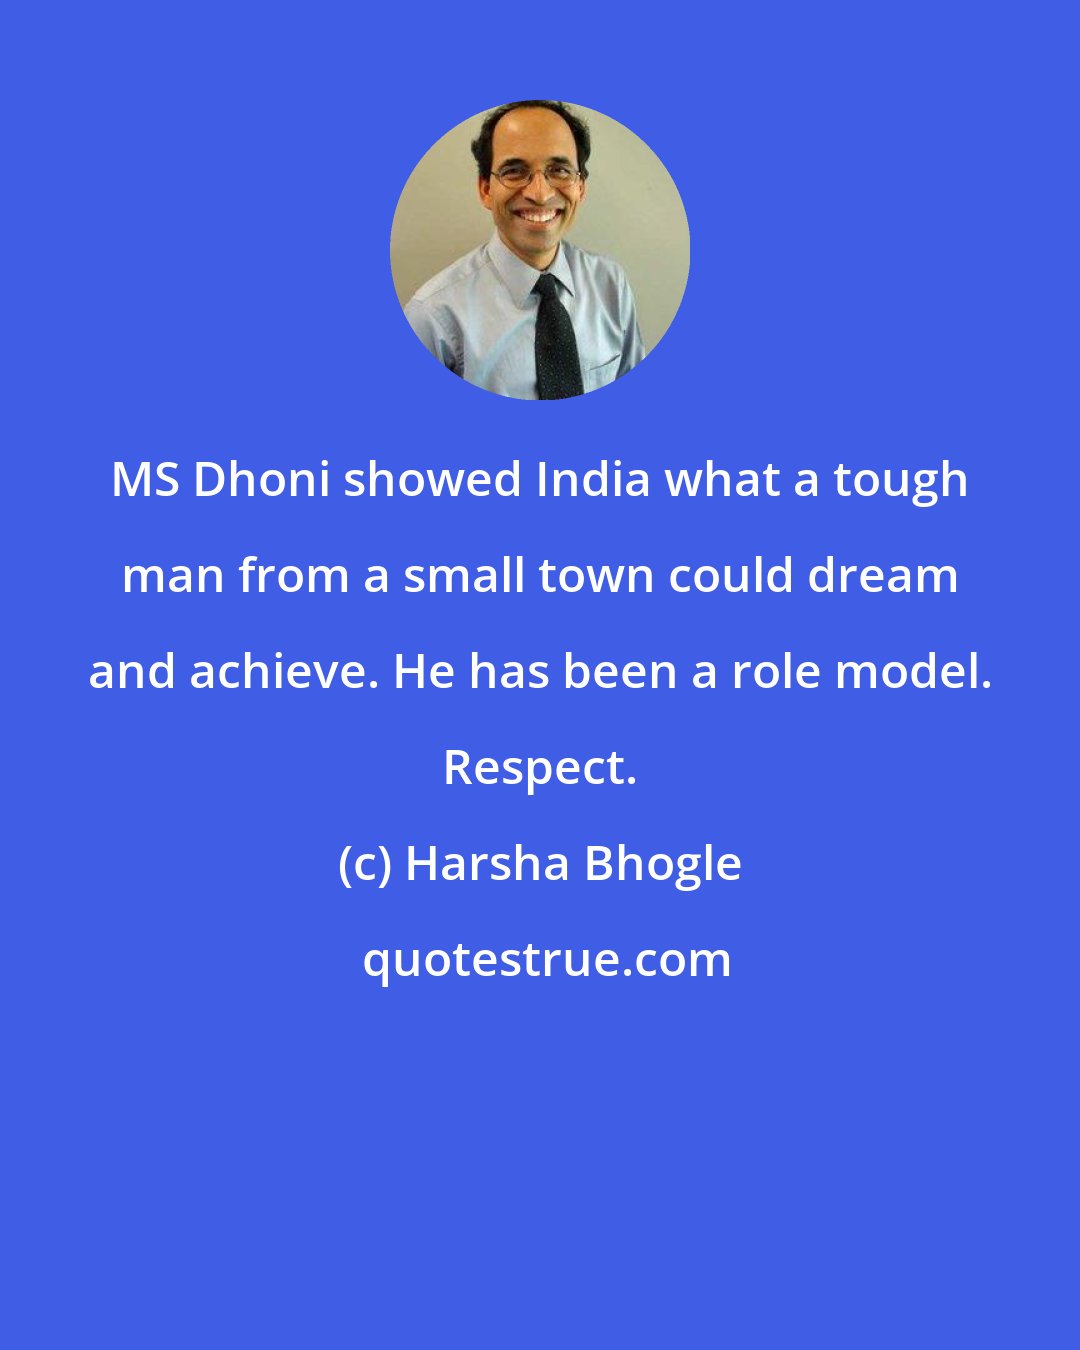 Harsha Bhogle: MS Dhoni showed India what a tough man from a small town could dream and achieve. He has been a role model. Respect.